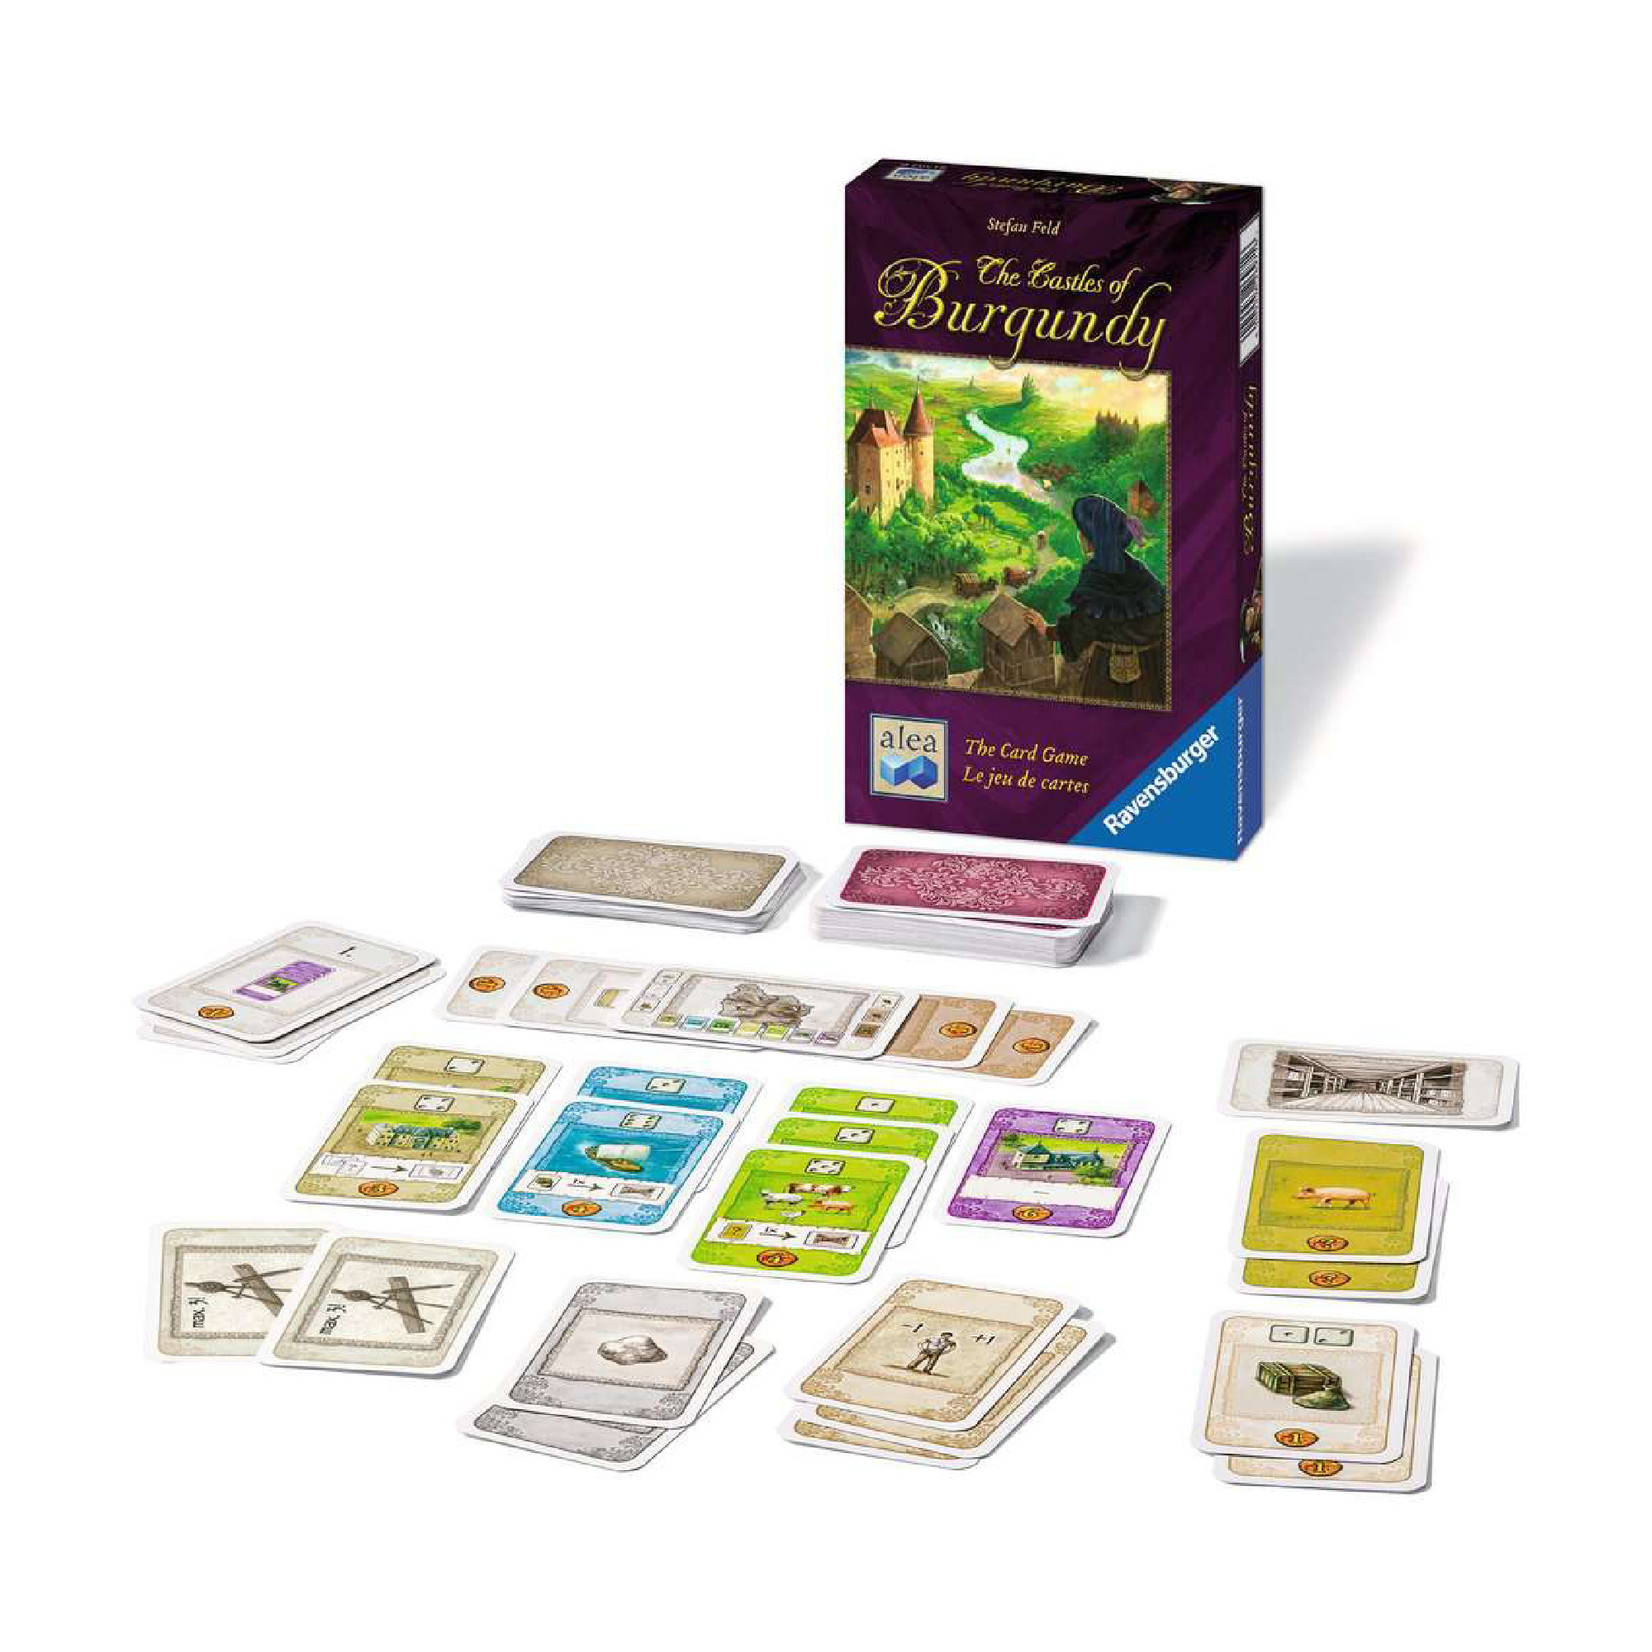 Ravensburger The Castles of Burgundy: The Card Game